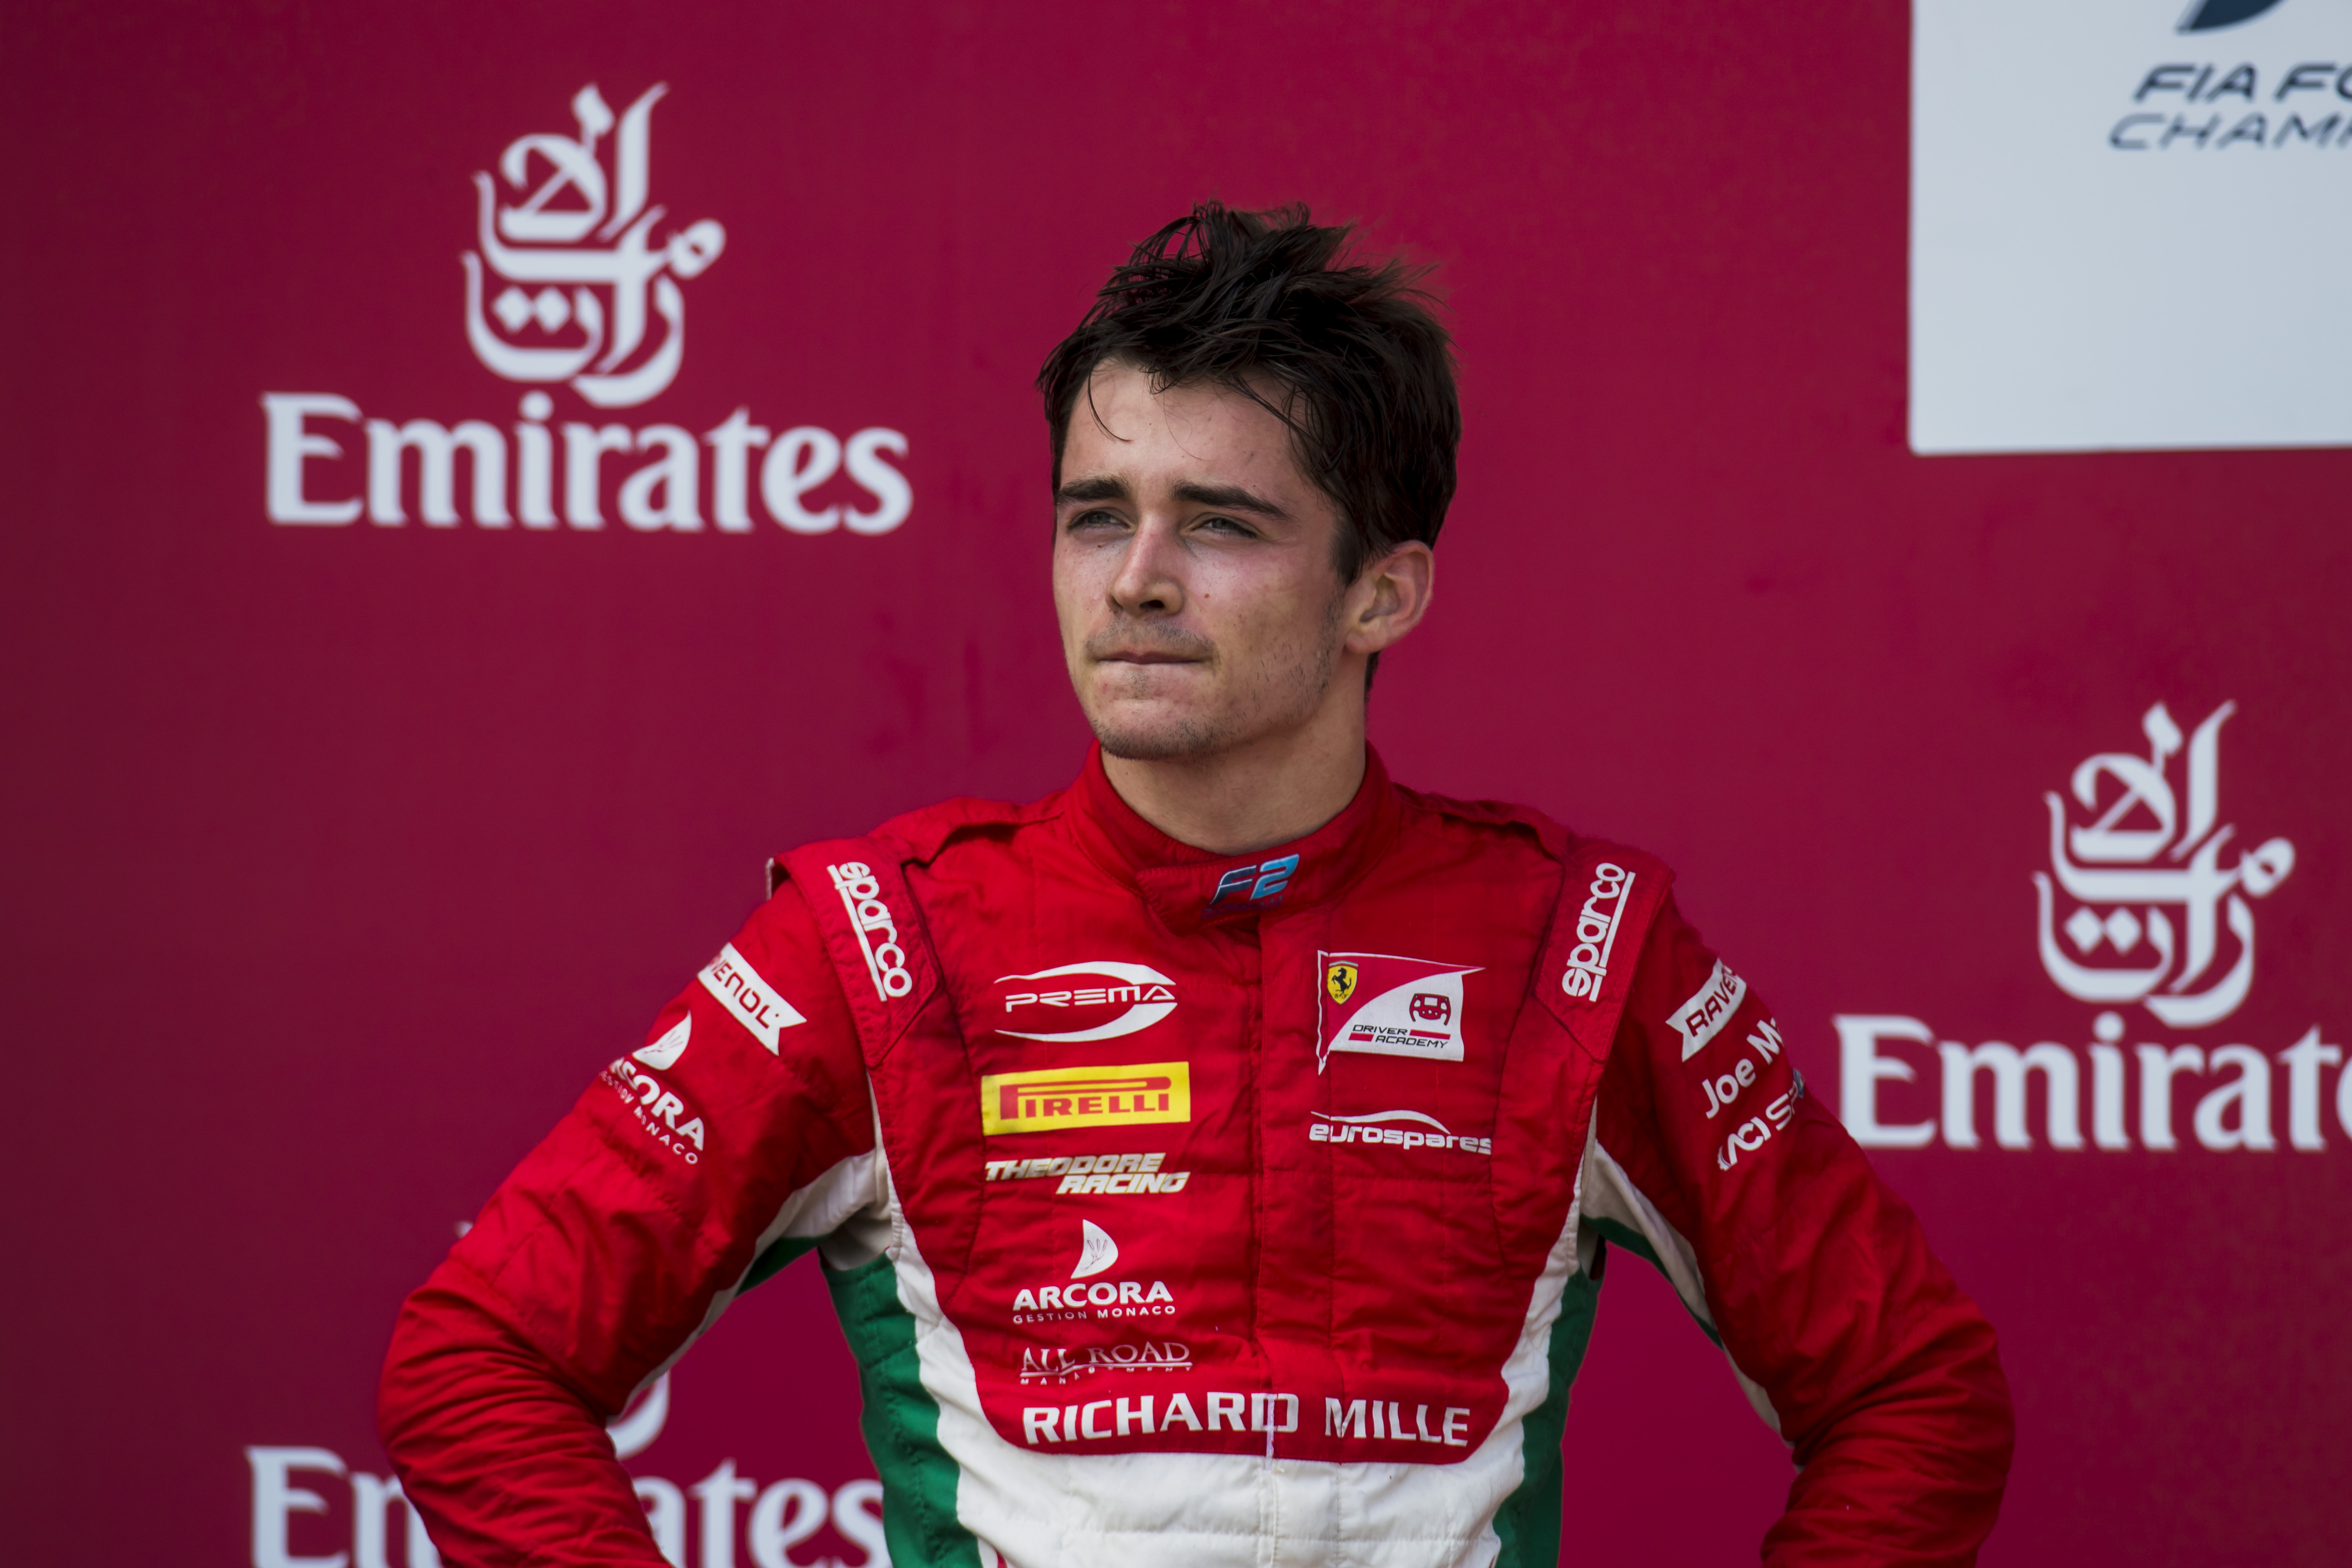 Charles Leclerc looks on during the 2017 FIA Formula 2 Round 4 at the Baku City Circuit on June 25, 2017, in Baku, Azerbaijan. | Source: Getty Images